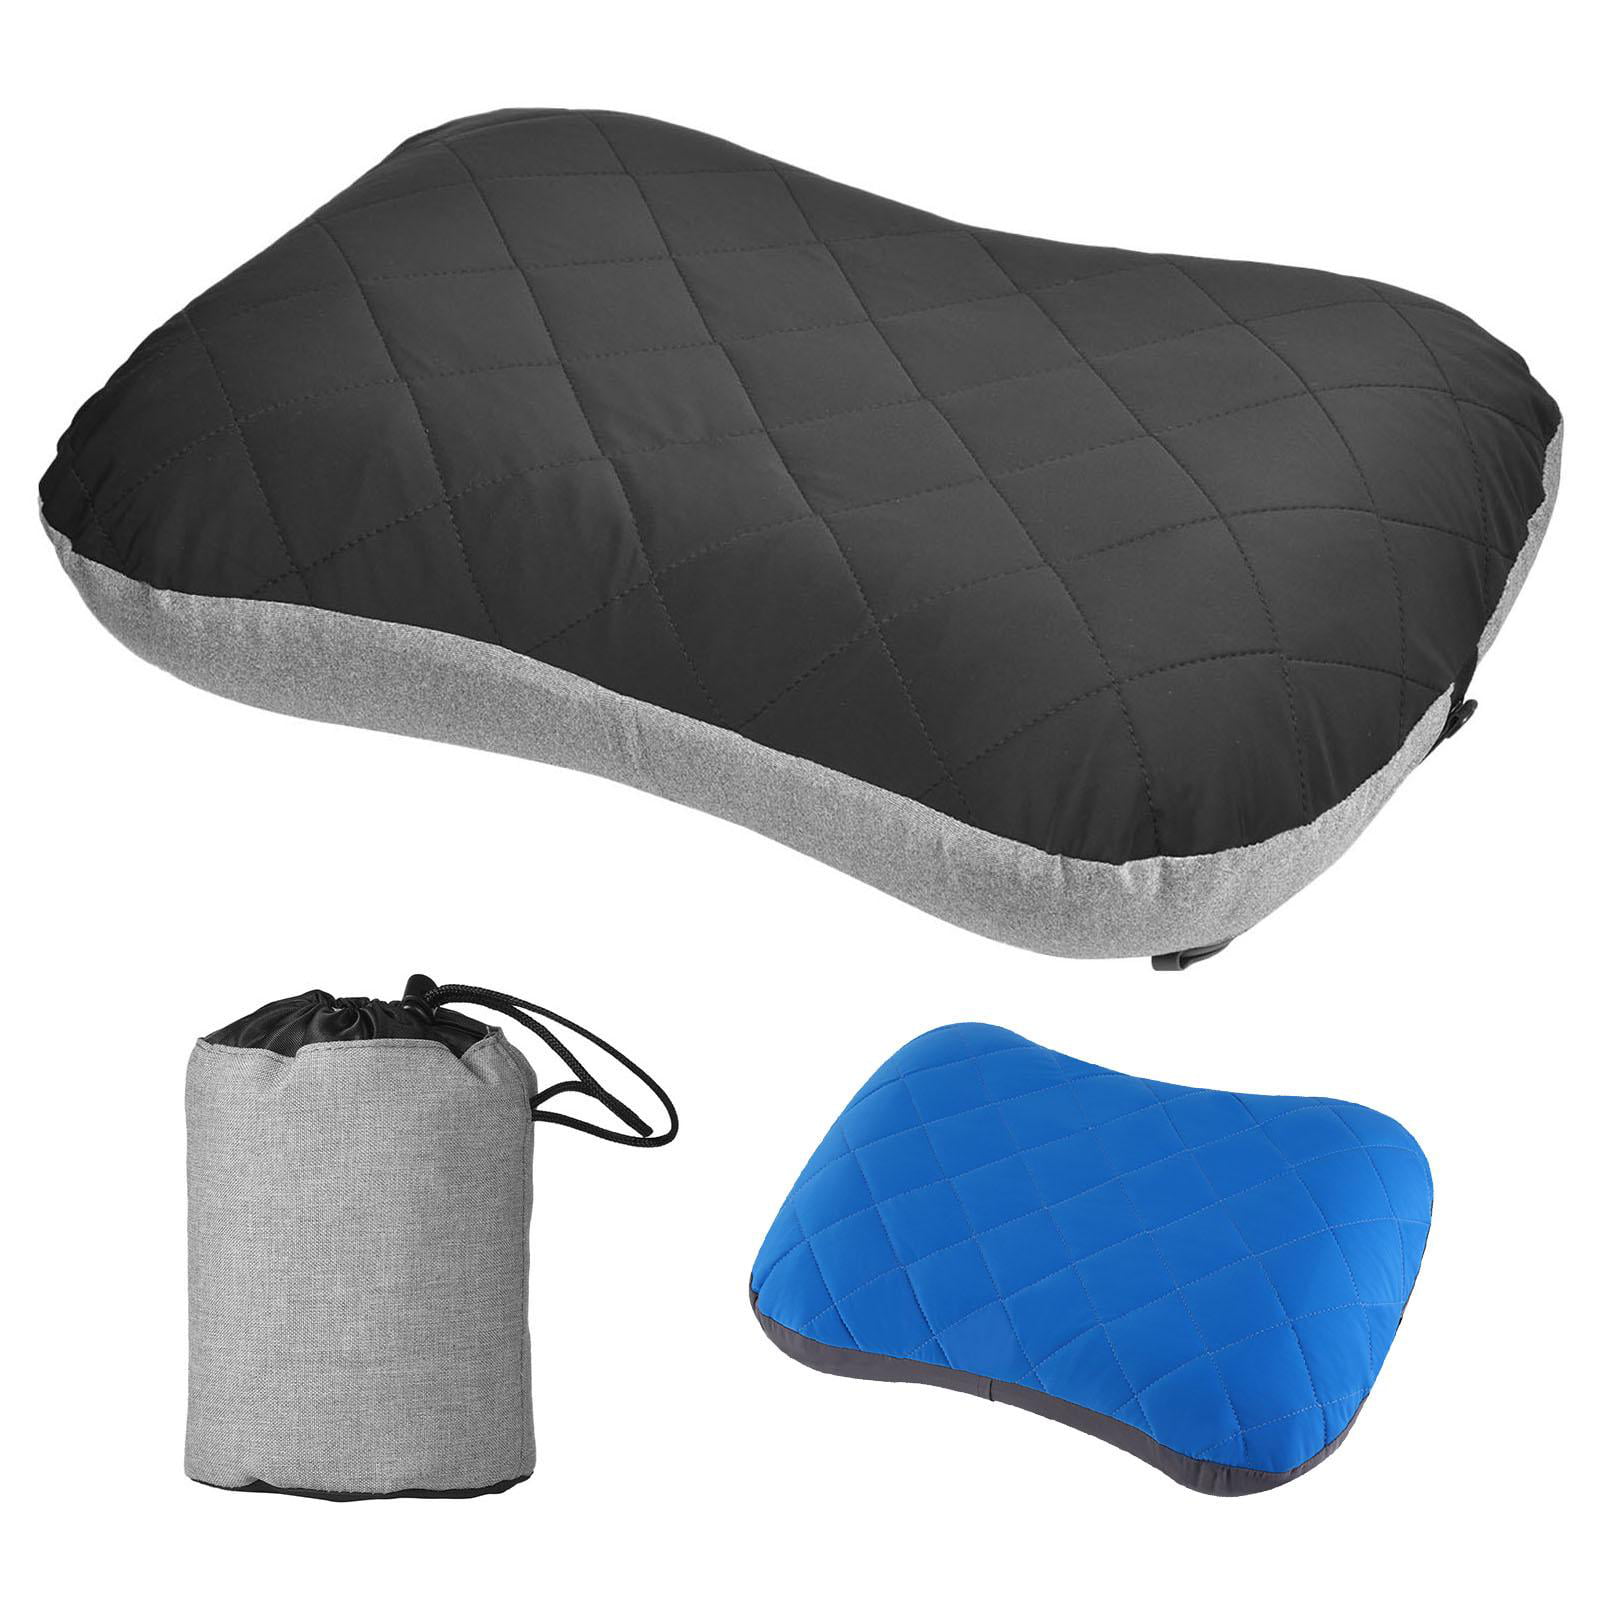 Air Inflatable Pillow Blow Up Neck Rest Soft Cushion Plane Camping Travel TPU